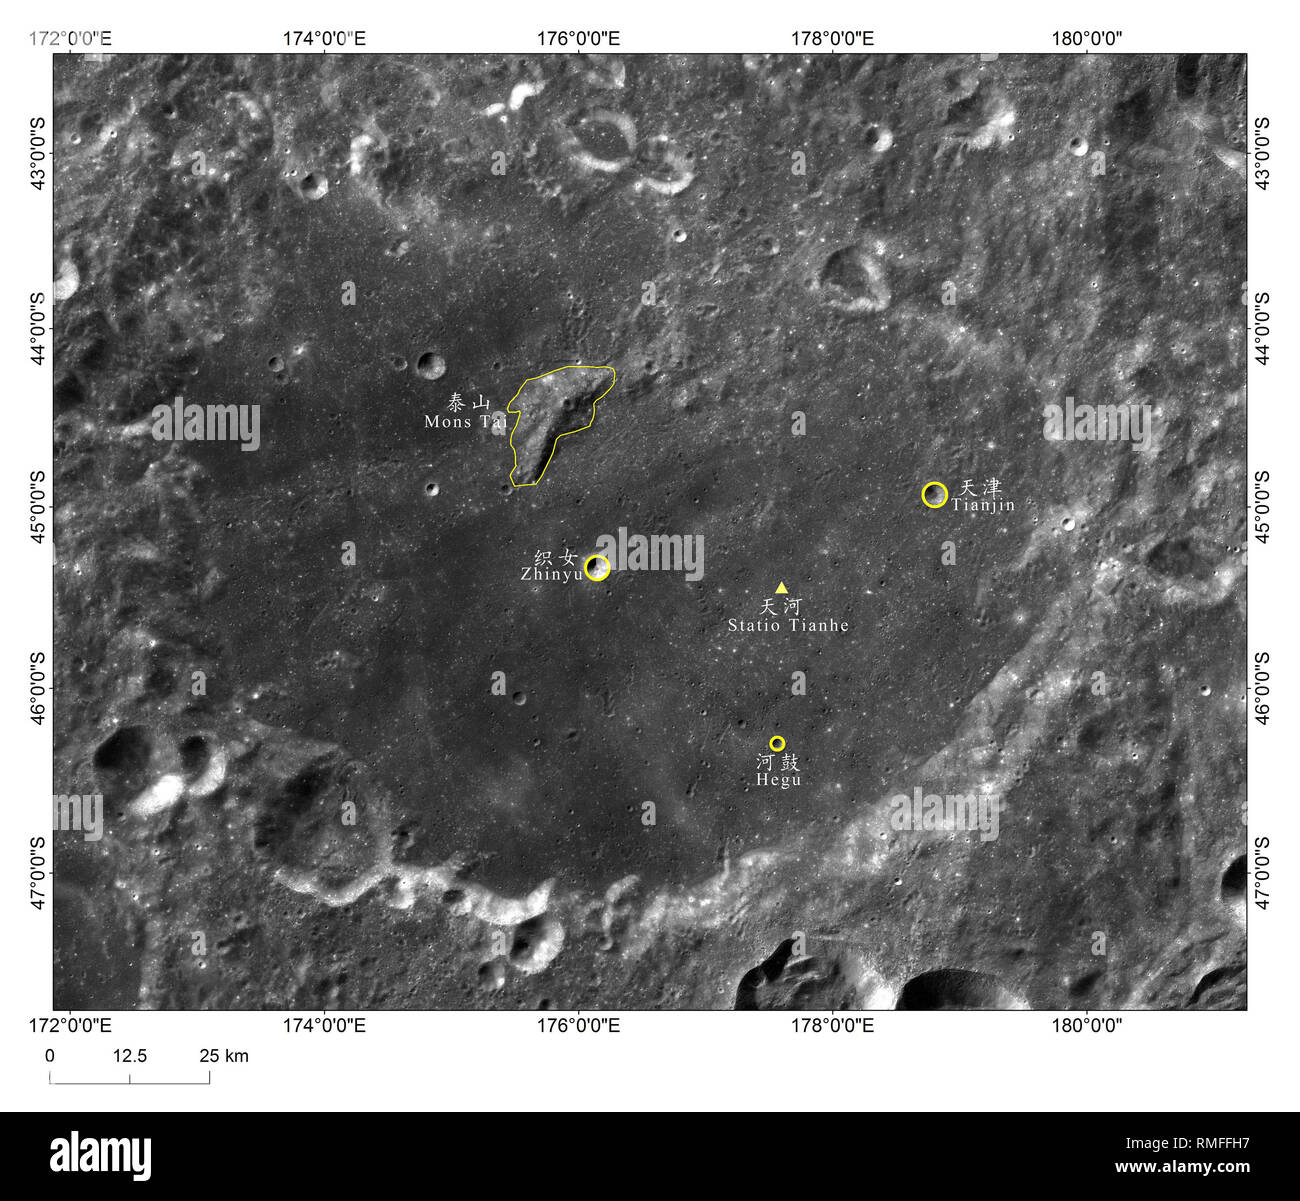 (190215) -- BEIJING, Feb. 15, 2019 (Xinhua) --     Photo provided by the China National Space Administration (CNSA) shows the image of the landing site of China's Chang'e-4 lunar probe, 'Statio Tianhe', surrounded by three nearby impact craters and one hill.     The landing site of China's Chang'e-4 lunar probe has been named 'Statio Tianhe' after the spacecraft made the first-ever soft landing on the far side of the moon last month.     Together with three nearby impact craters and one hill, the name was approved by the International Astronomical Union (IAU), Liu Jizhong, director of the Chin Stock Photo